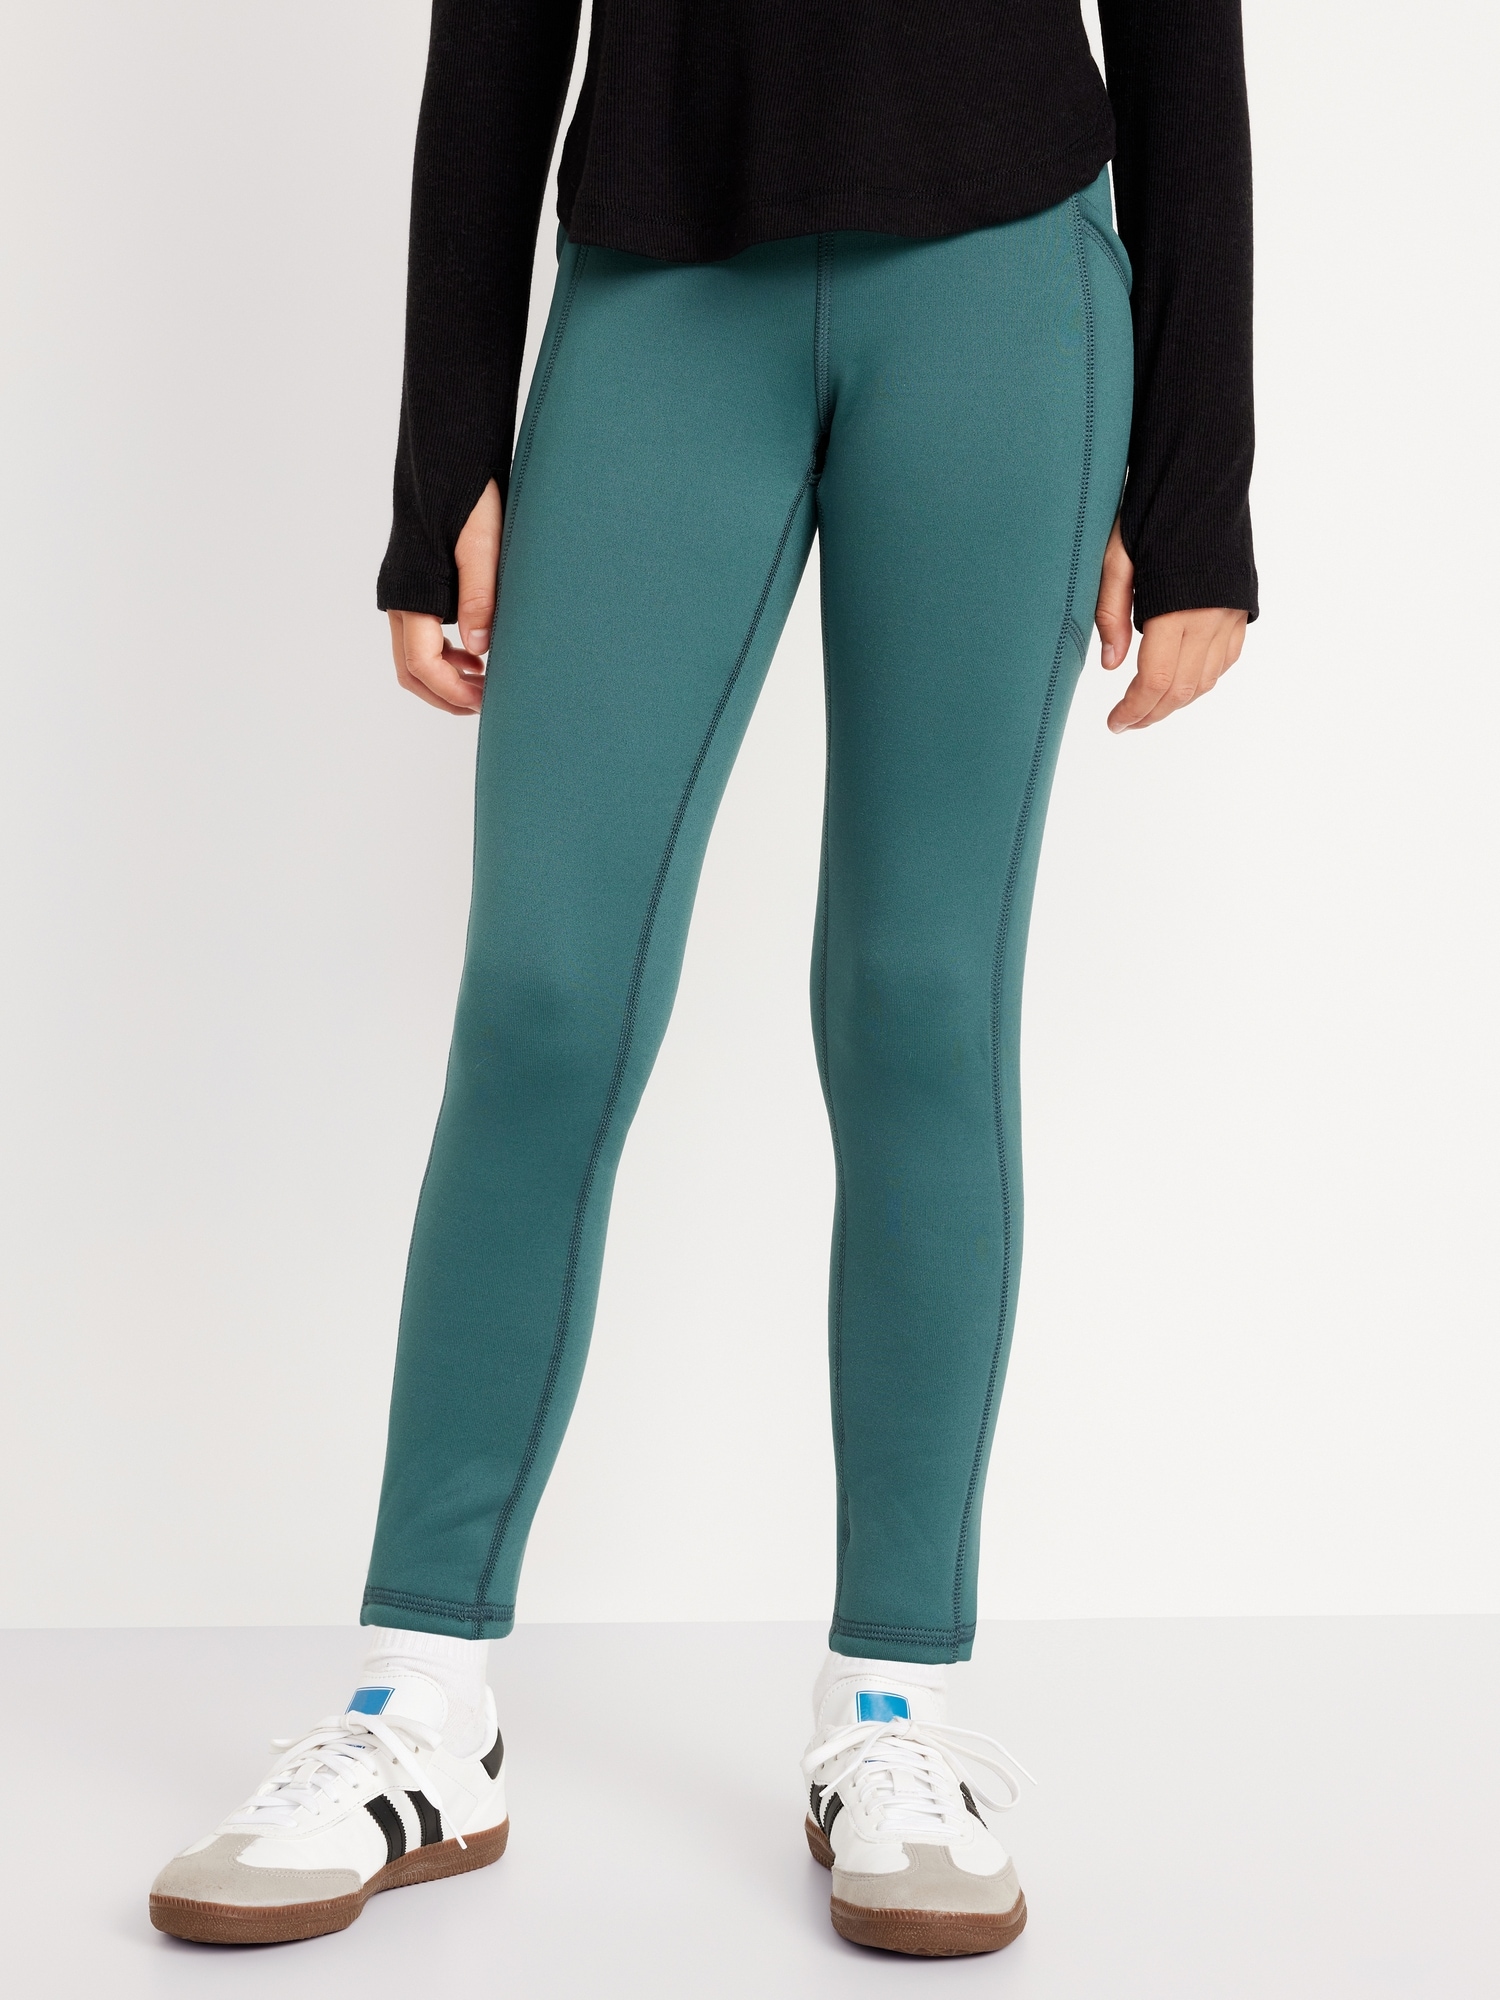 Ultra Stretch Rib Cross Over Leggings with side pocket, Azure Blue